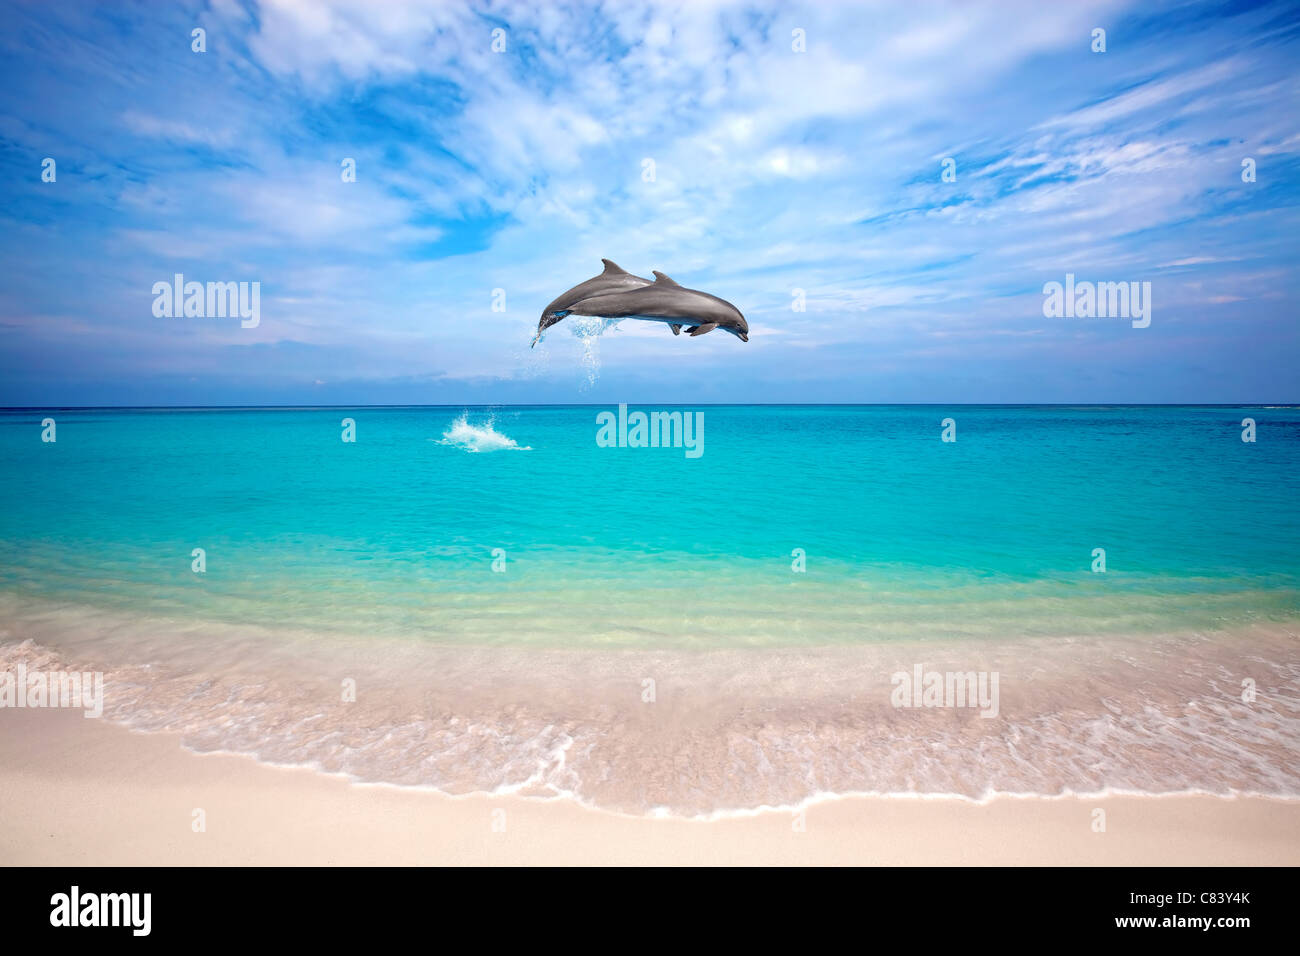 Two dolphins jumping in the Caribbean sea Stock Photo